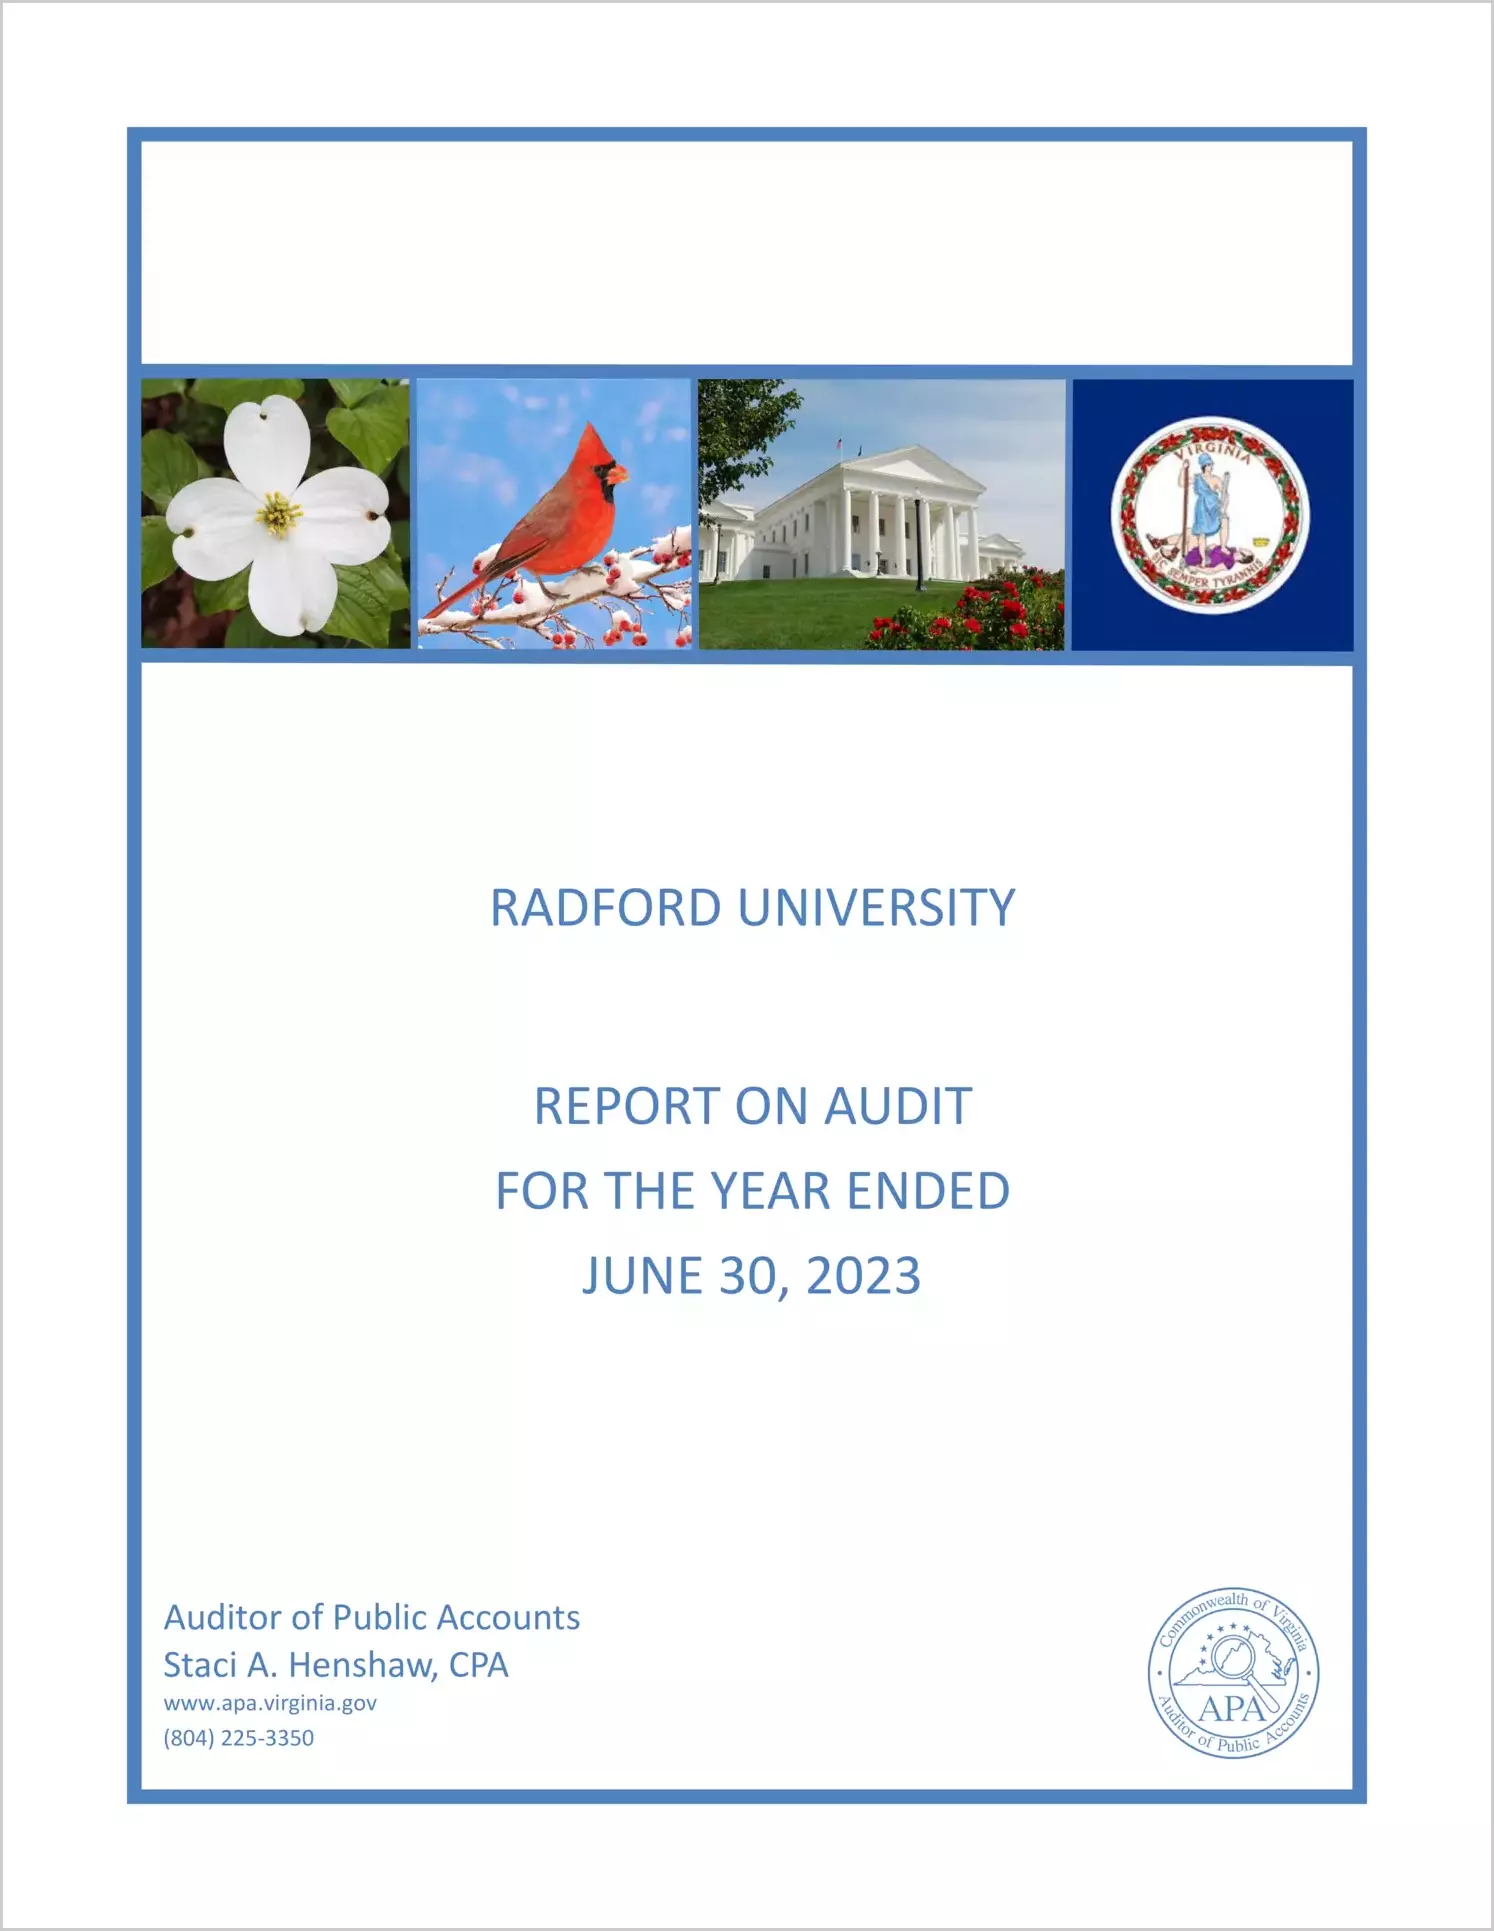 Radford University for the year ended June 30, 2023